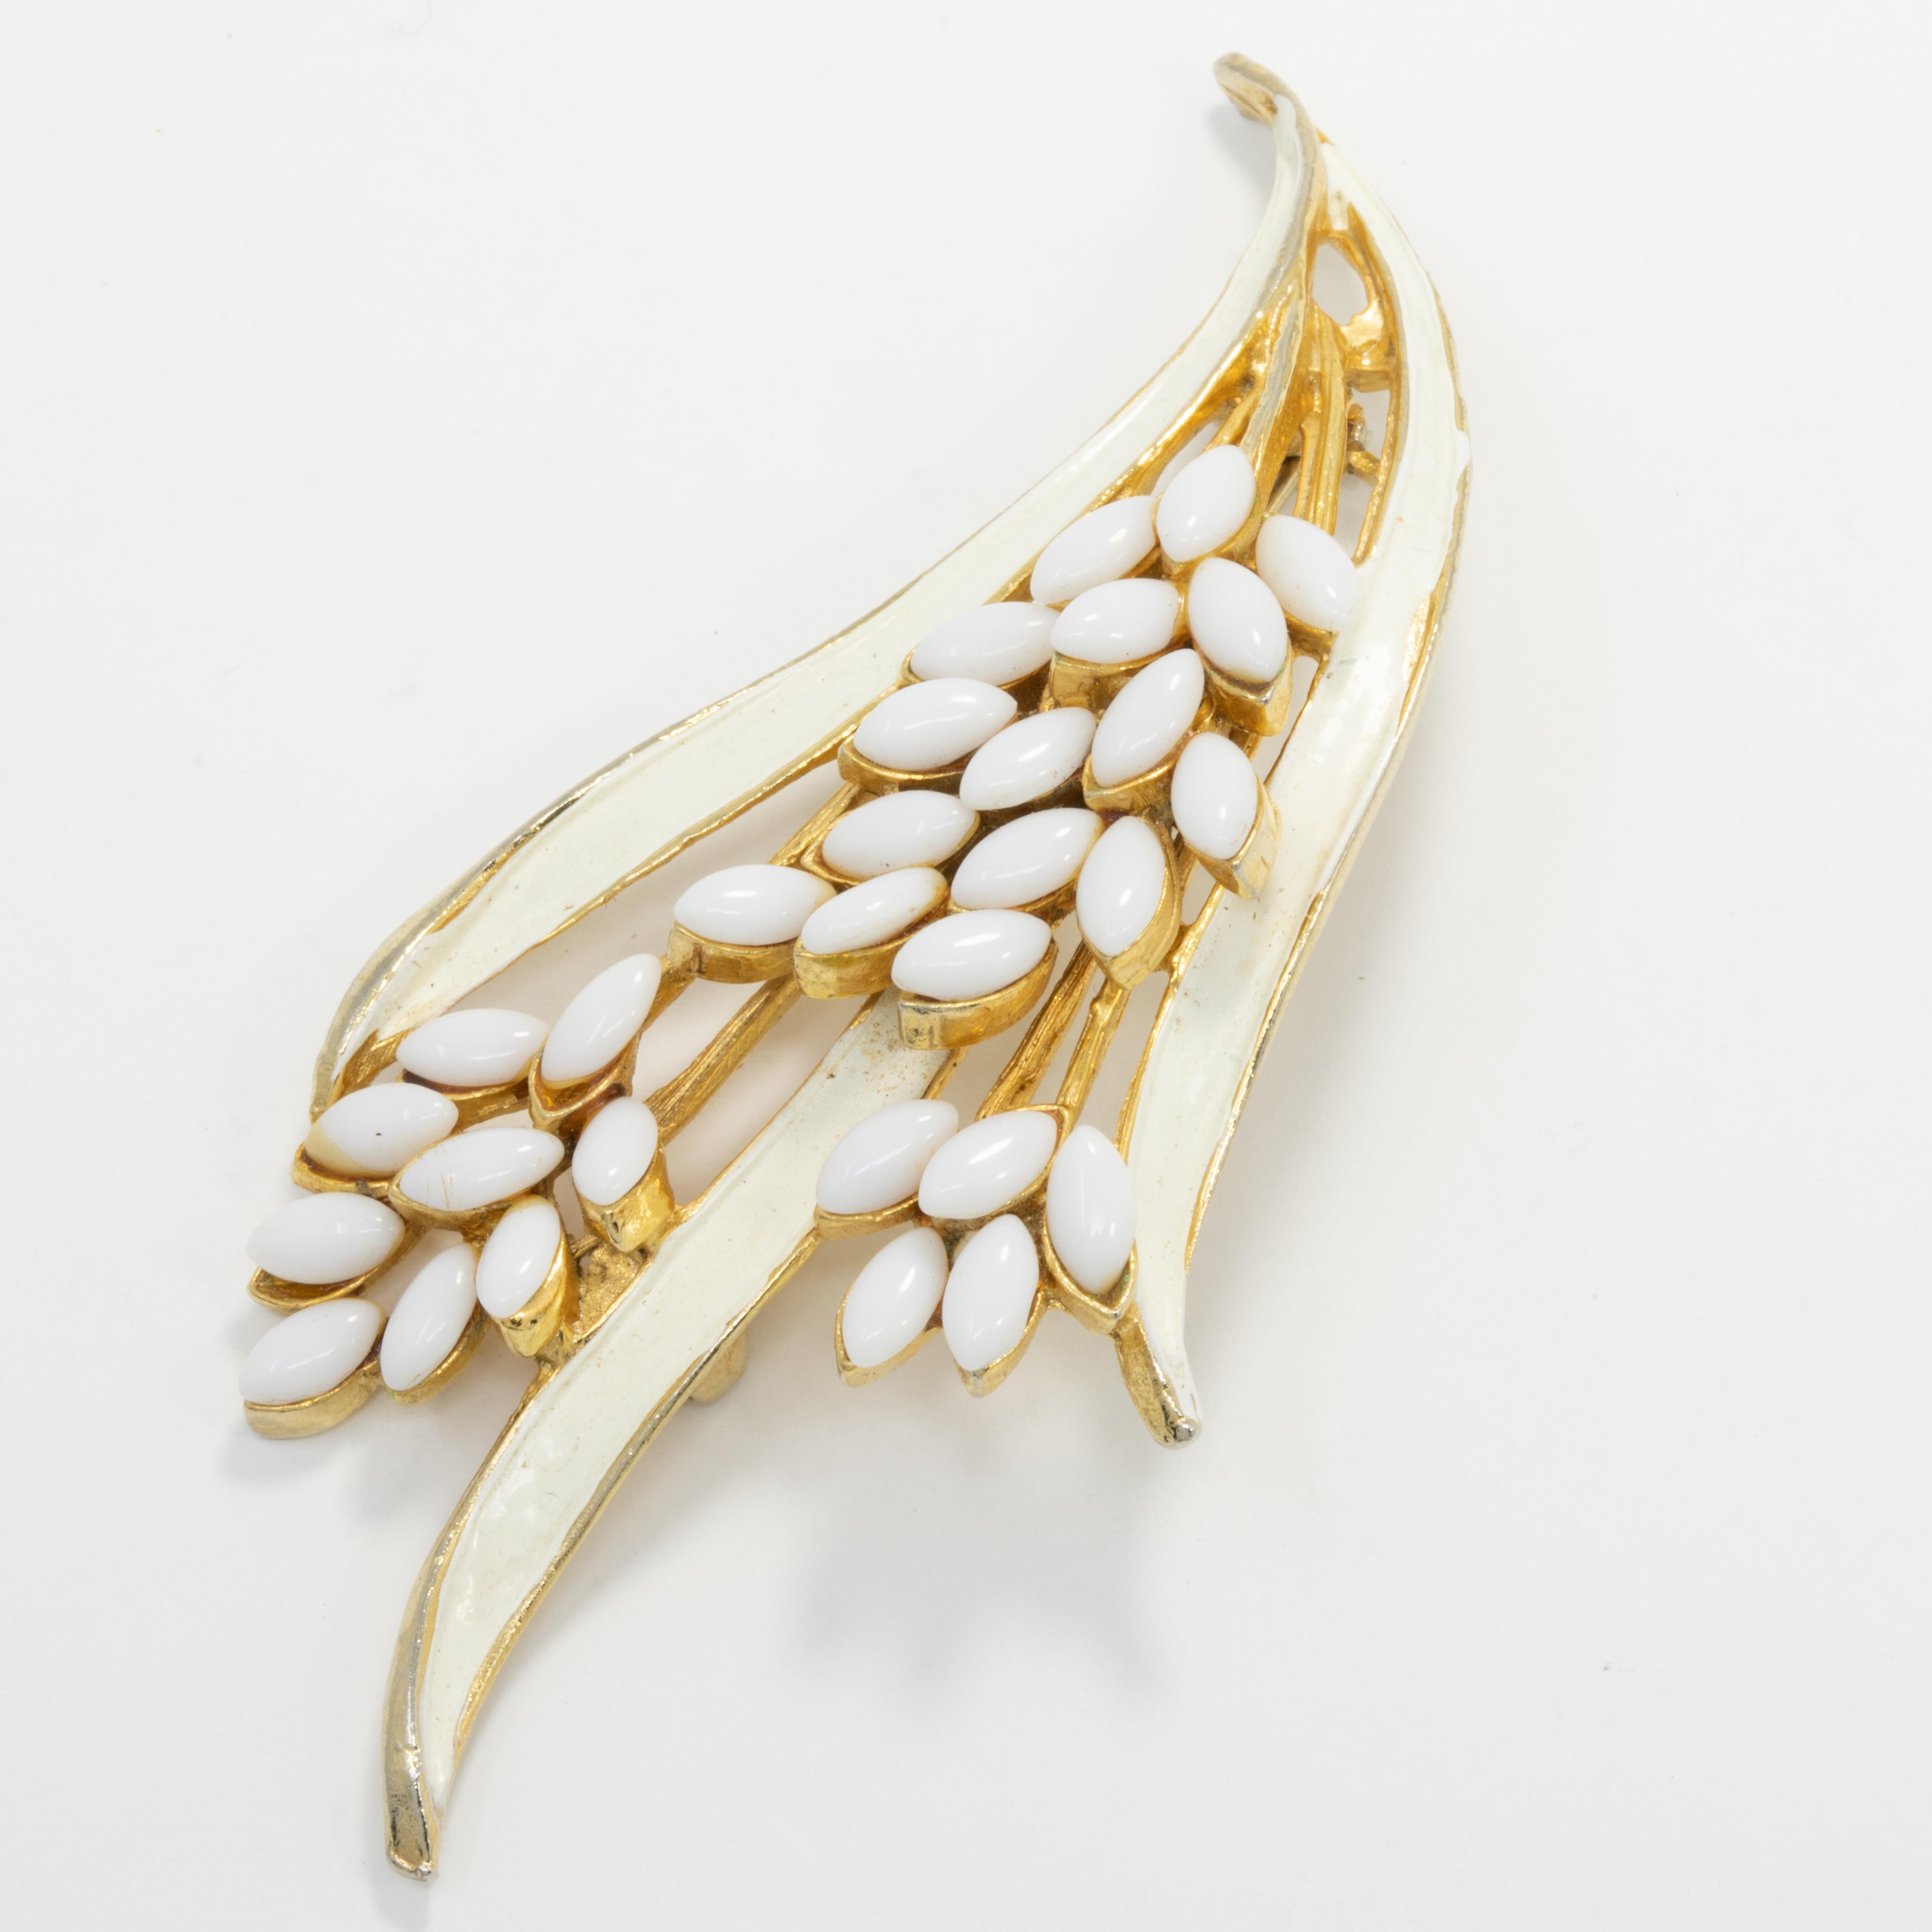 An elegant floral bouquet, the perfect accent for any style! Golden vintage pin brooch by Arthur Pepper, featuring white enamel leaves and white glass cabochon petals.

Gold-plated.

Marks / hallmarks / etc: Art